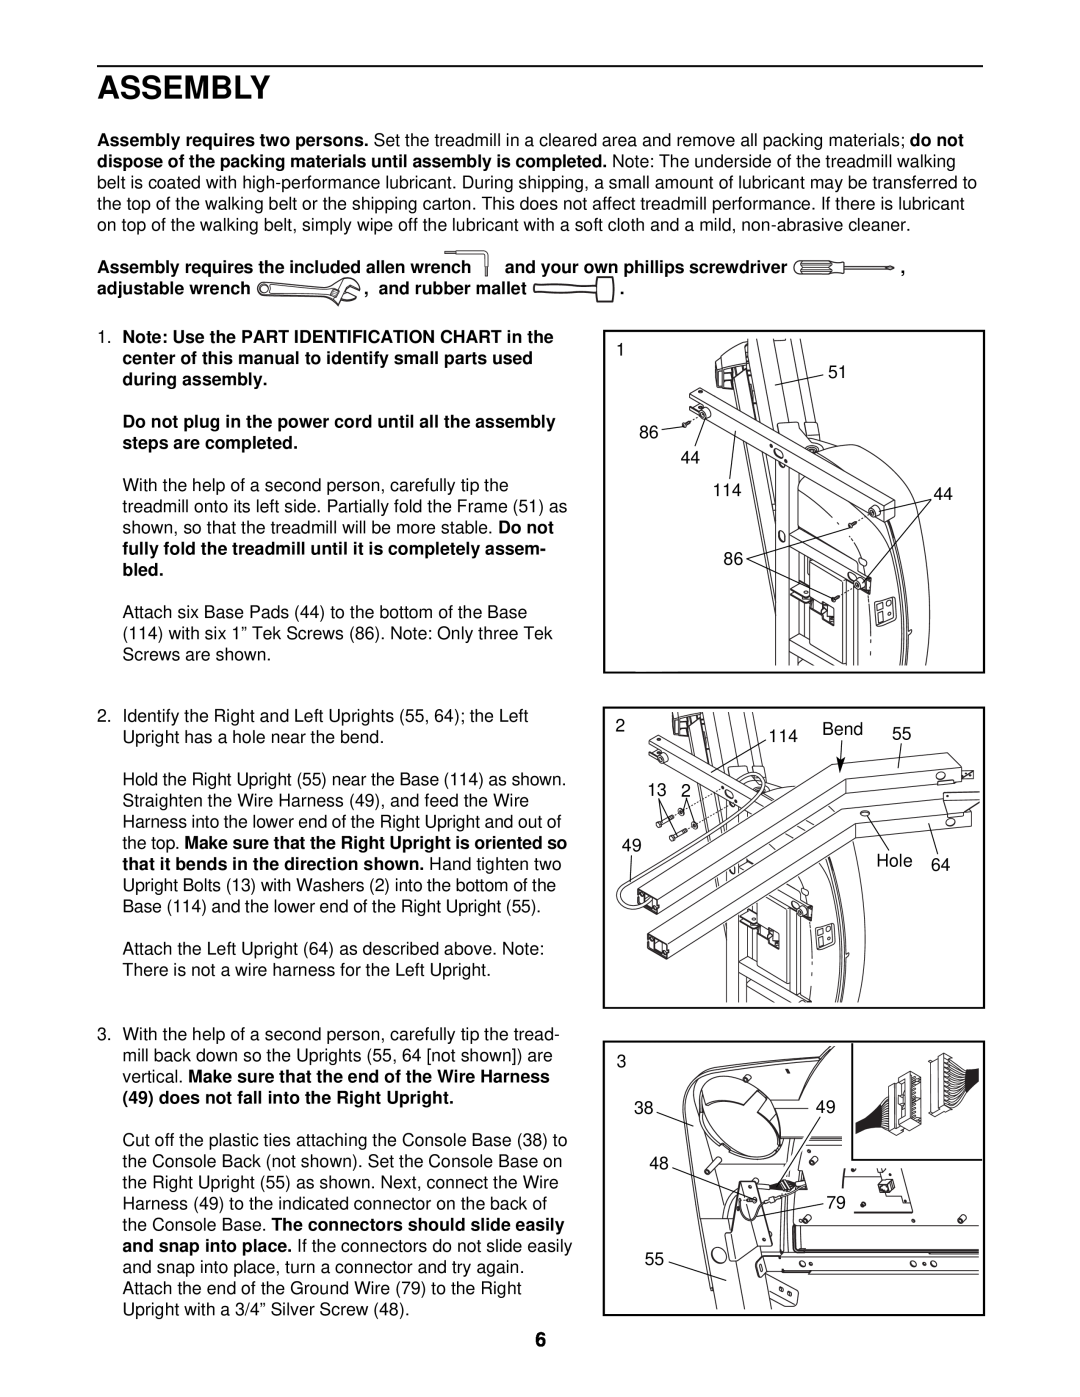 ProForm PFTL49721 user manual Assembly requires the included allen wrench, adjustable wrench, and rubber mallet 